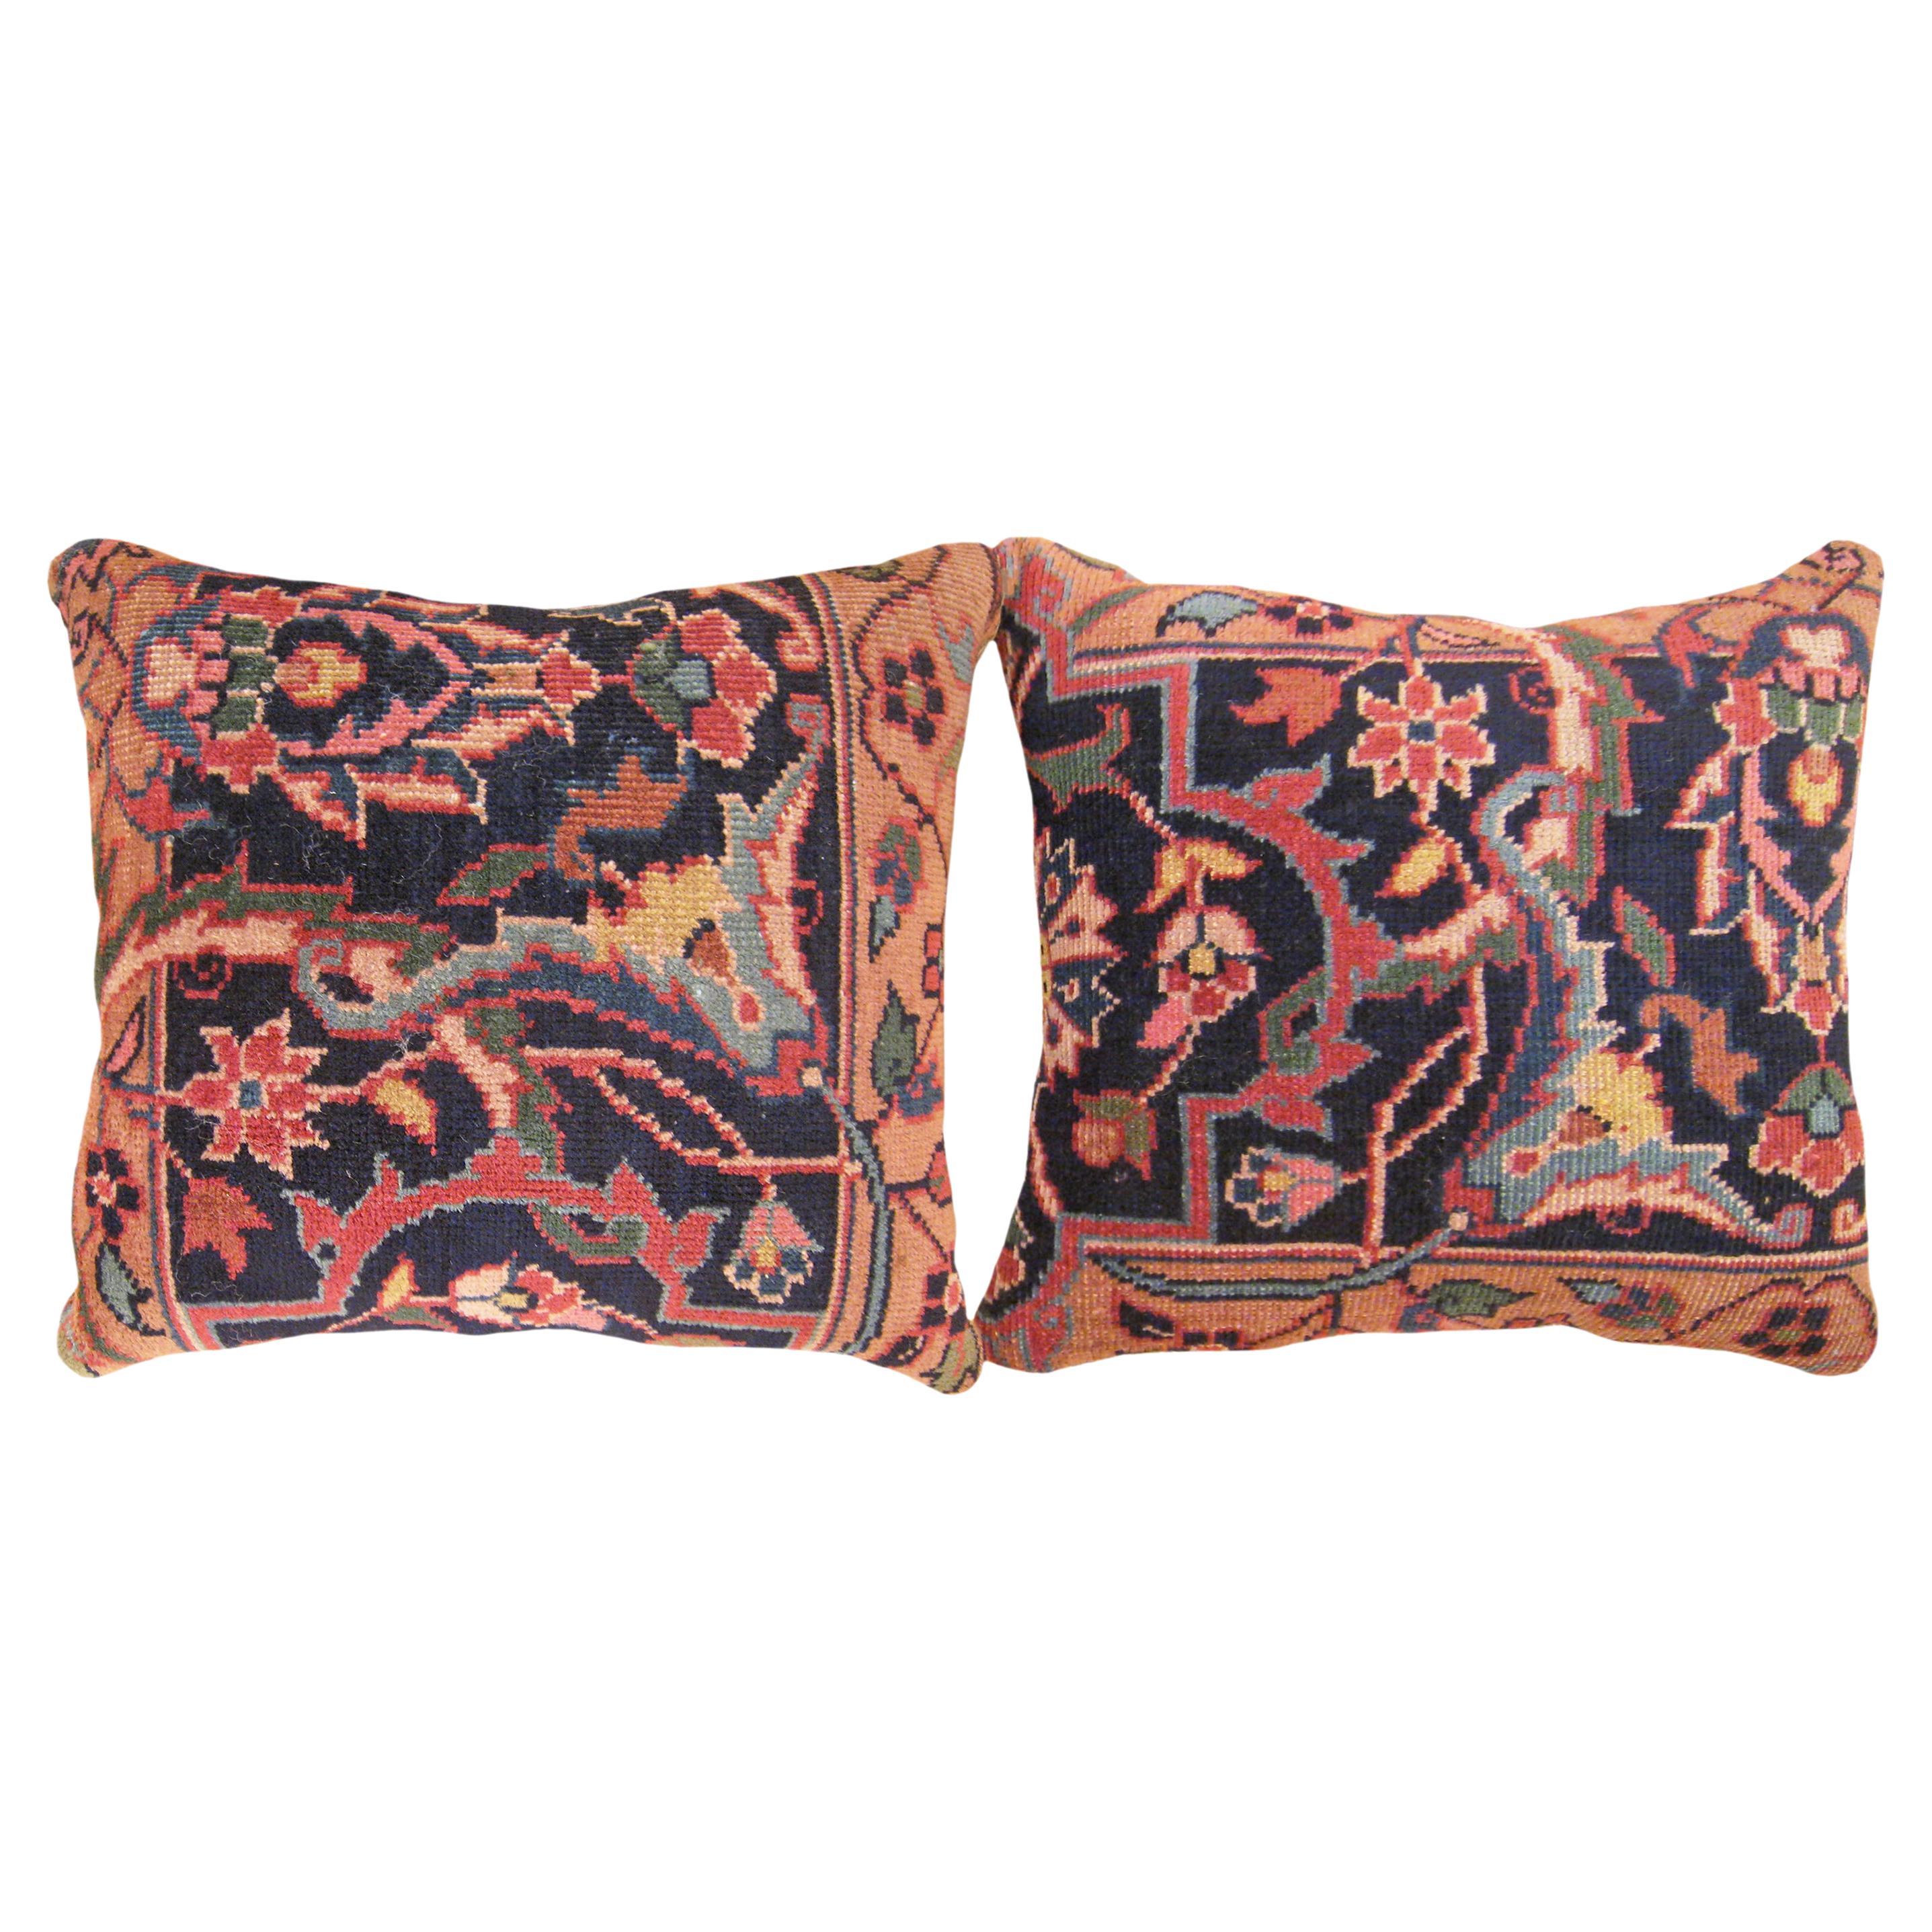 A Pair of Decorative Antique Indian Agra Rug Pillows with Floral Elements